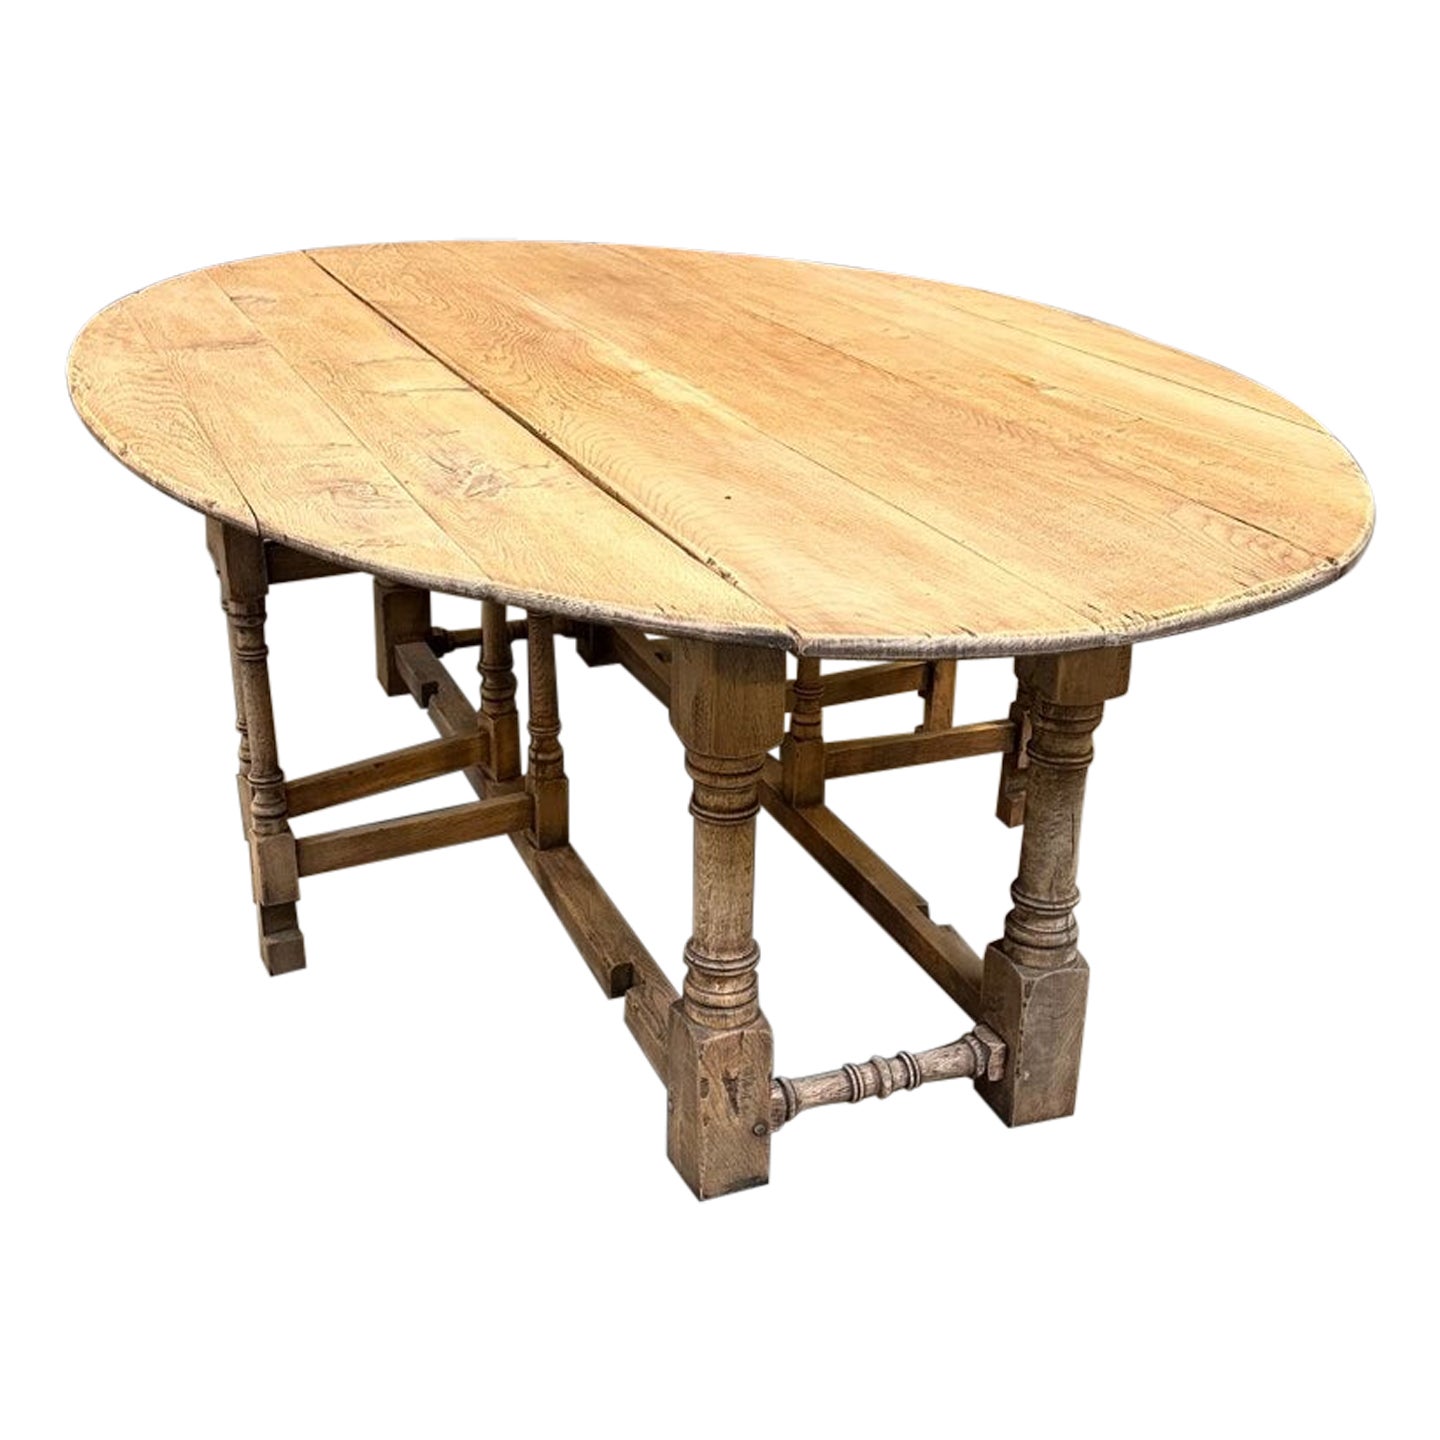 Large oval white oak table in good For Sale